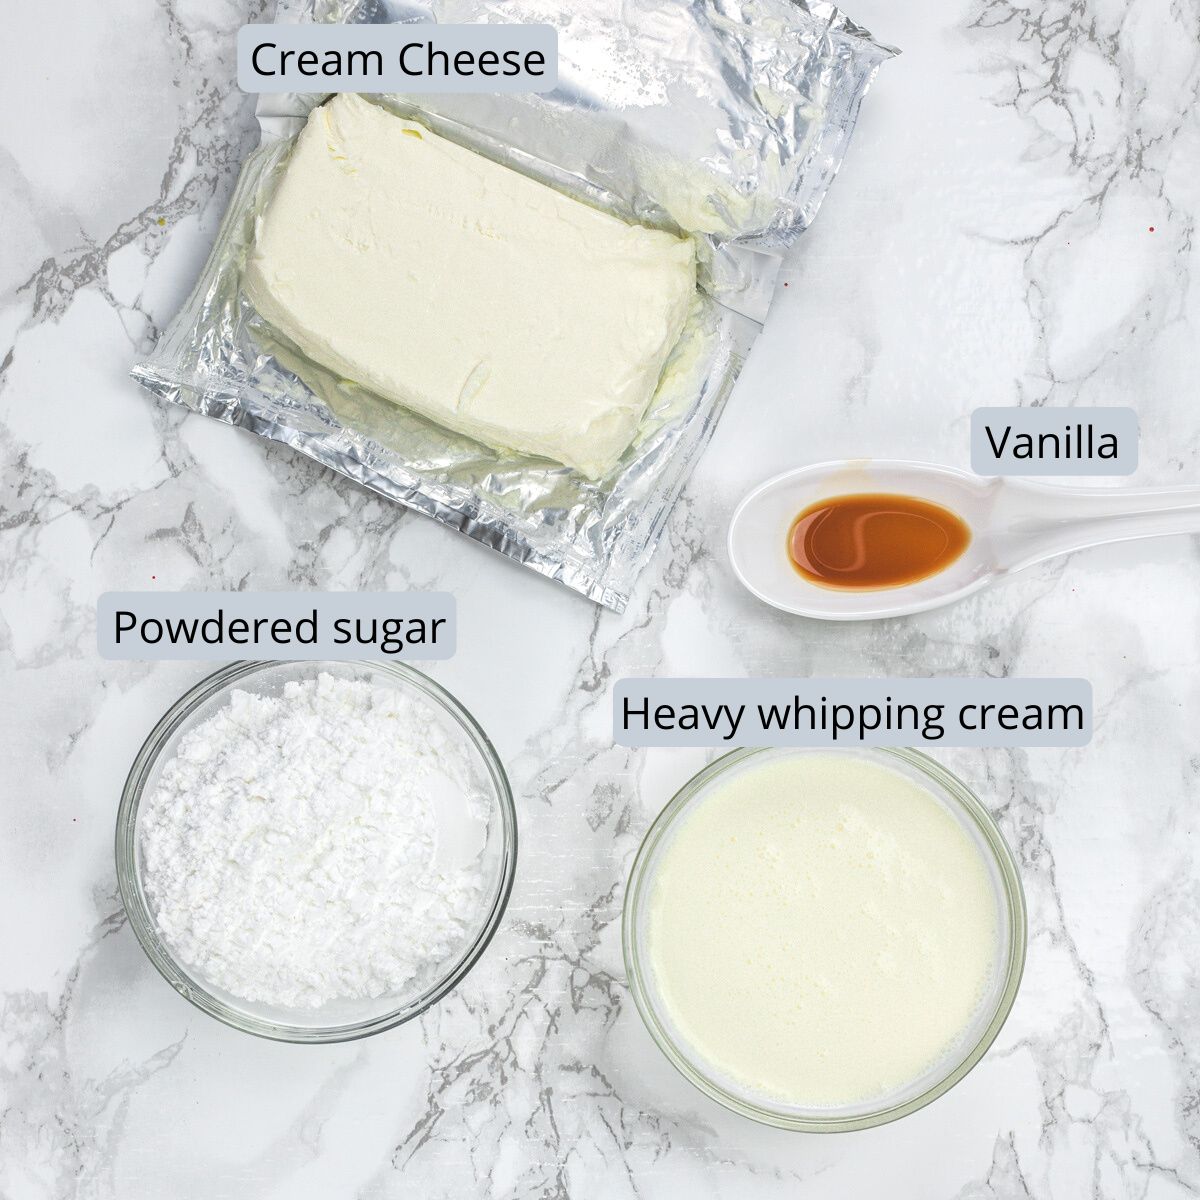 Whipped cream cheese frosting ingredients in bowls and spoon with labels.